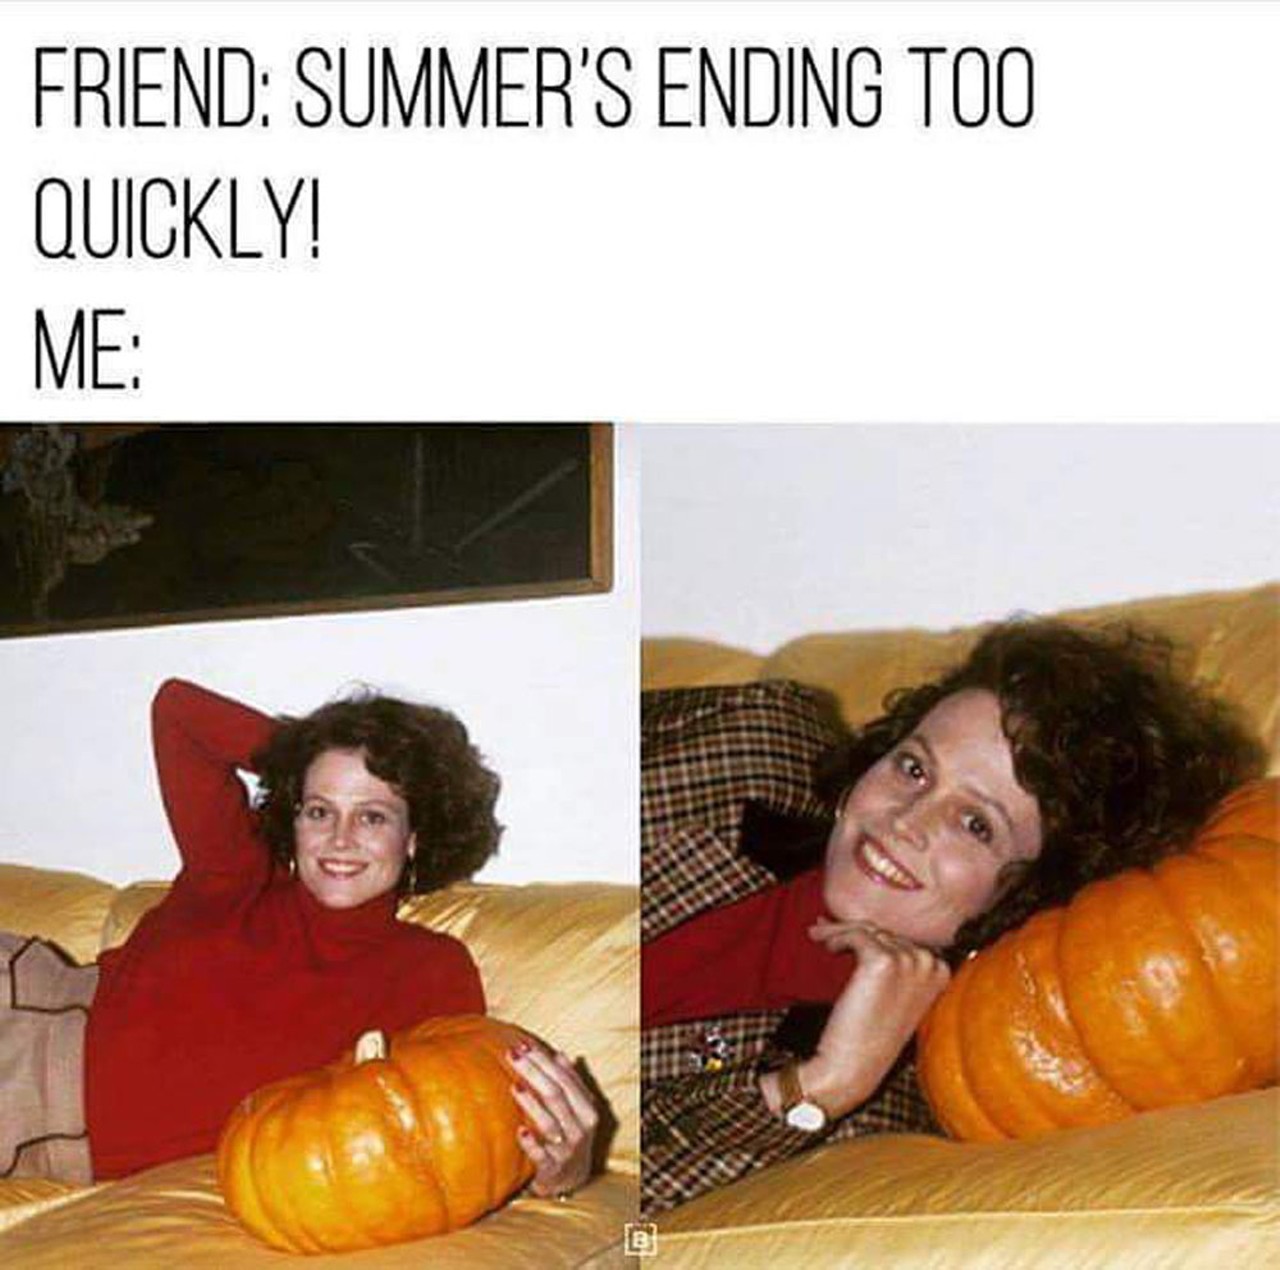 13 of the best pumpkin memes to make your day a little better